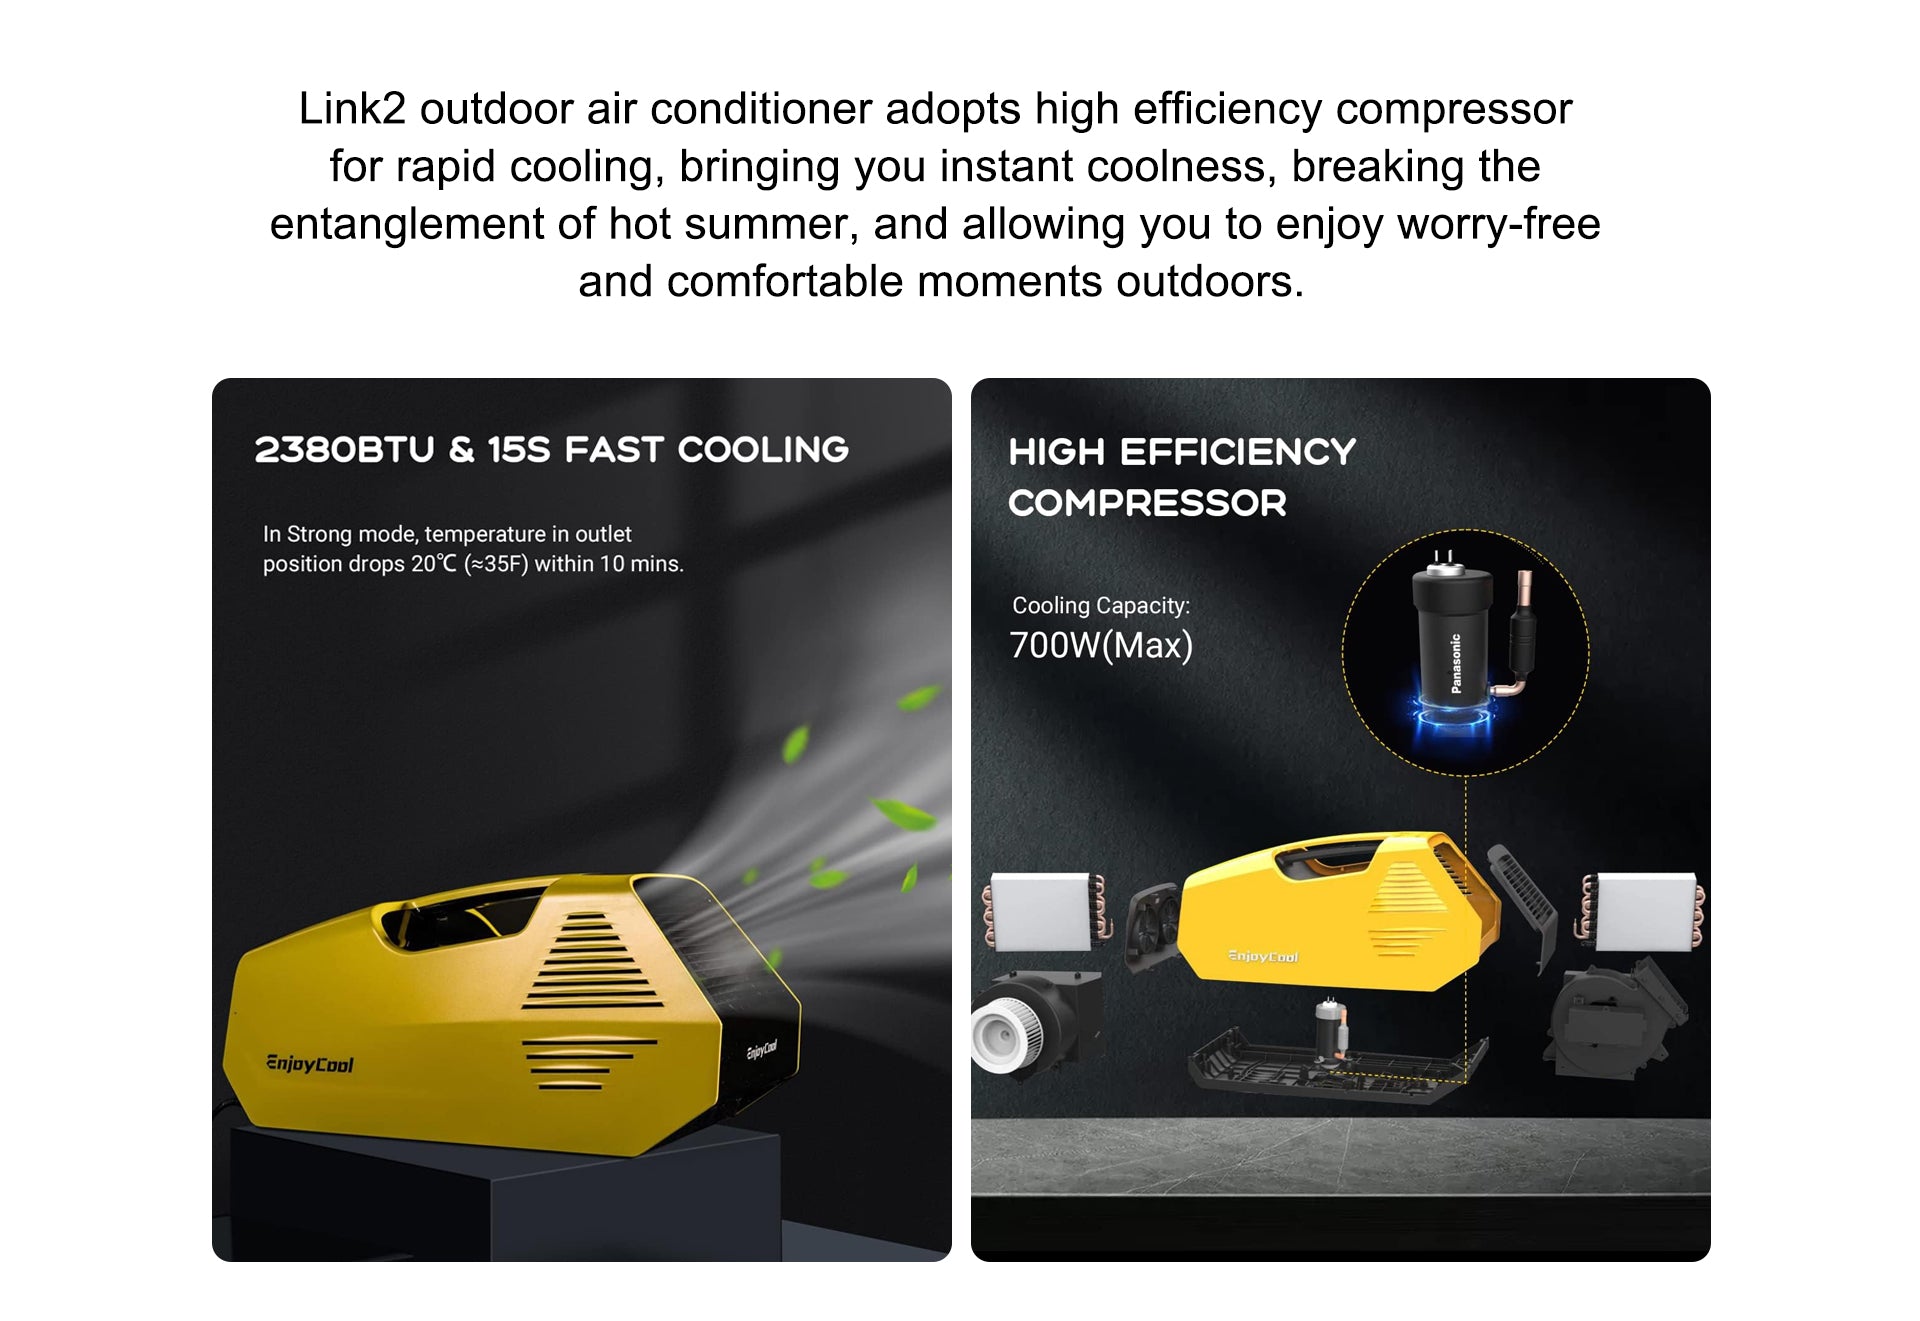 Link2 outdoor air conditioner（portable hvac unit，portble ac unit）adopts advanced refrigeration technology, air conditioning portable unit is fast cooling, bringing you instant coolness, breaking the entanglement of hot heat, so that you can enjoy worry-free and comfortable moments outdoors.